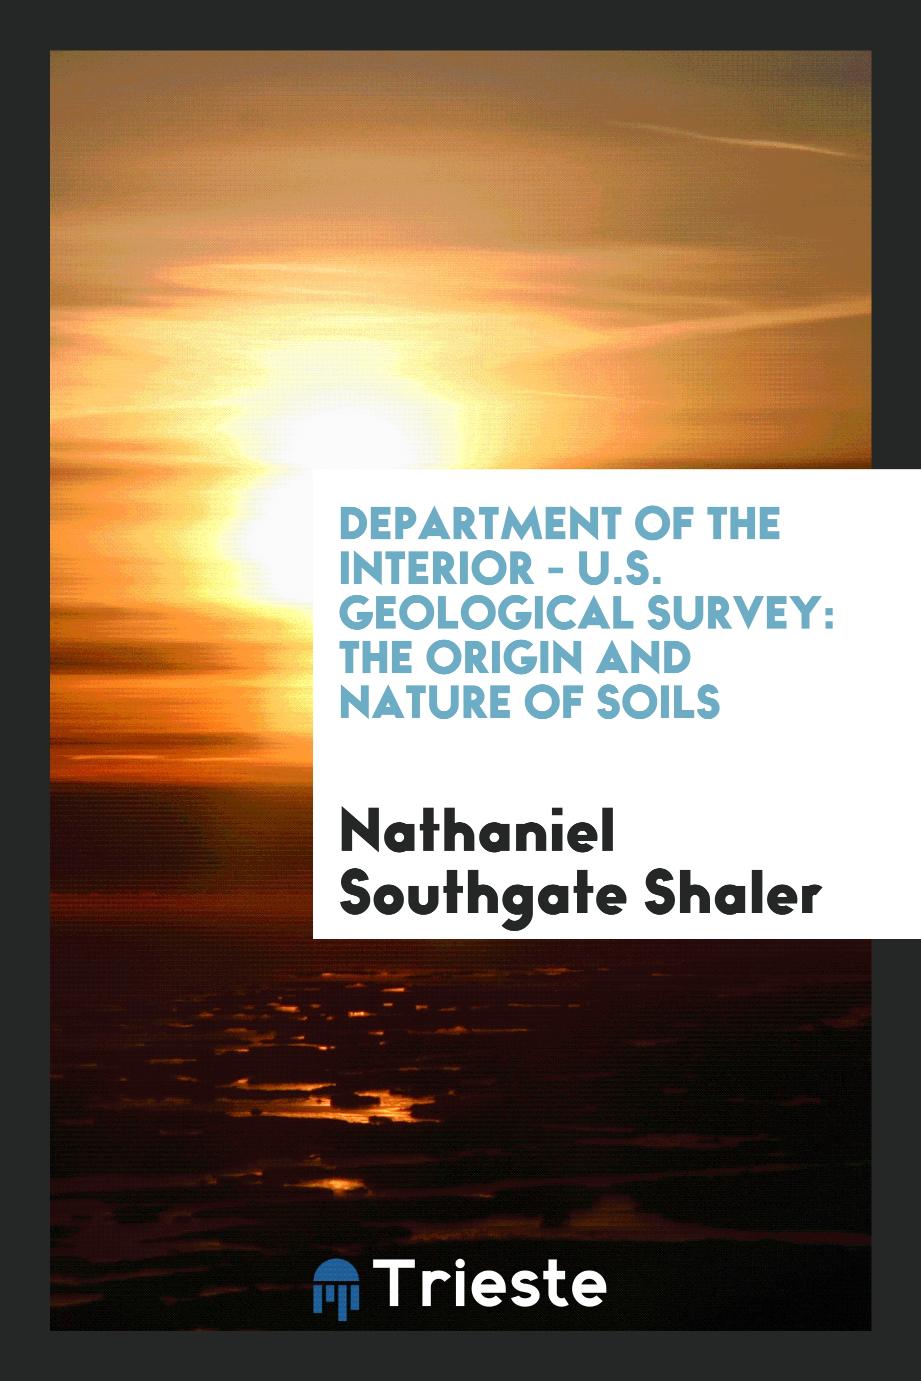 Department of the Interior - U.S. Geological Survey: The Origin and Nature of Soils